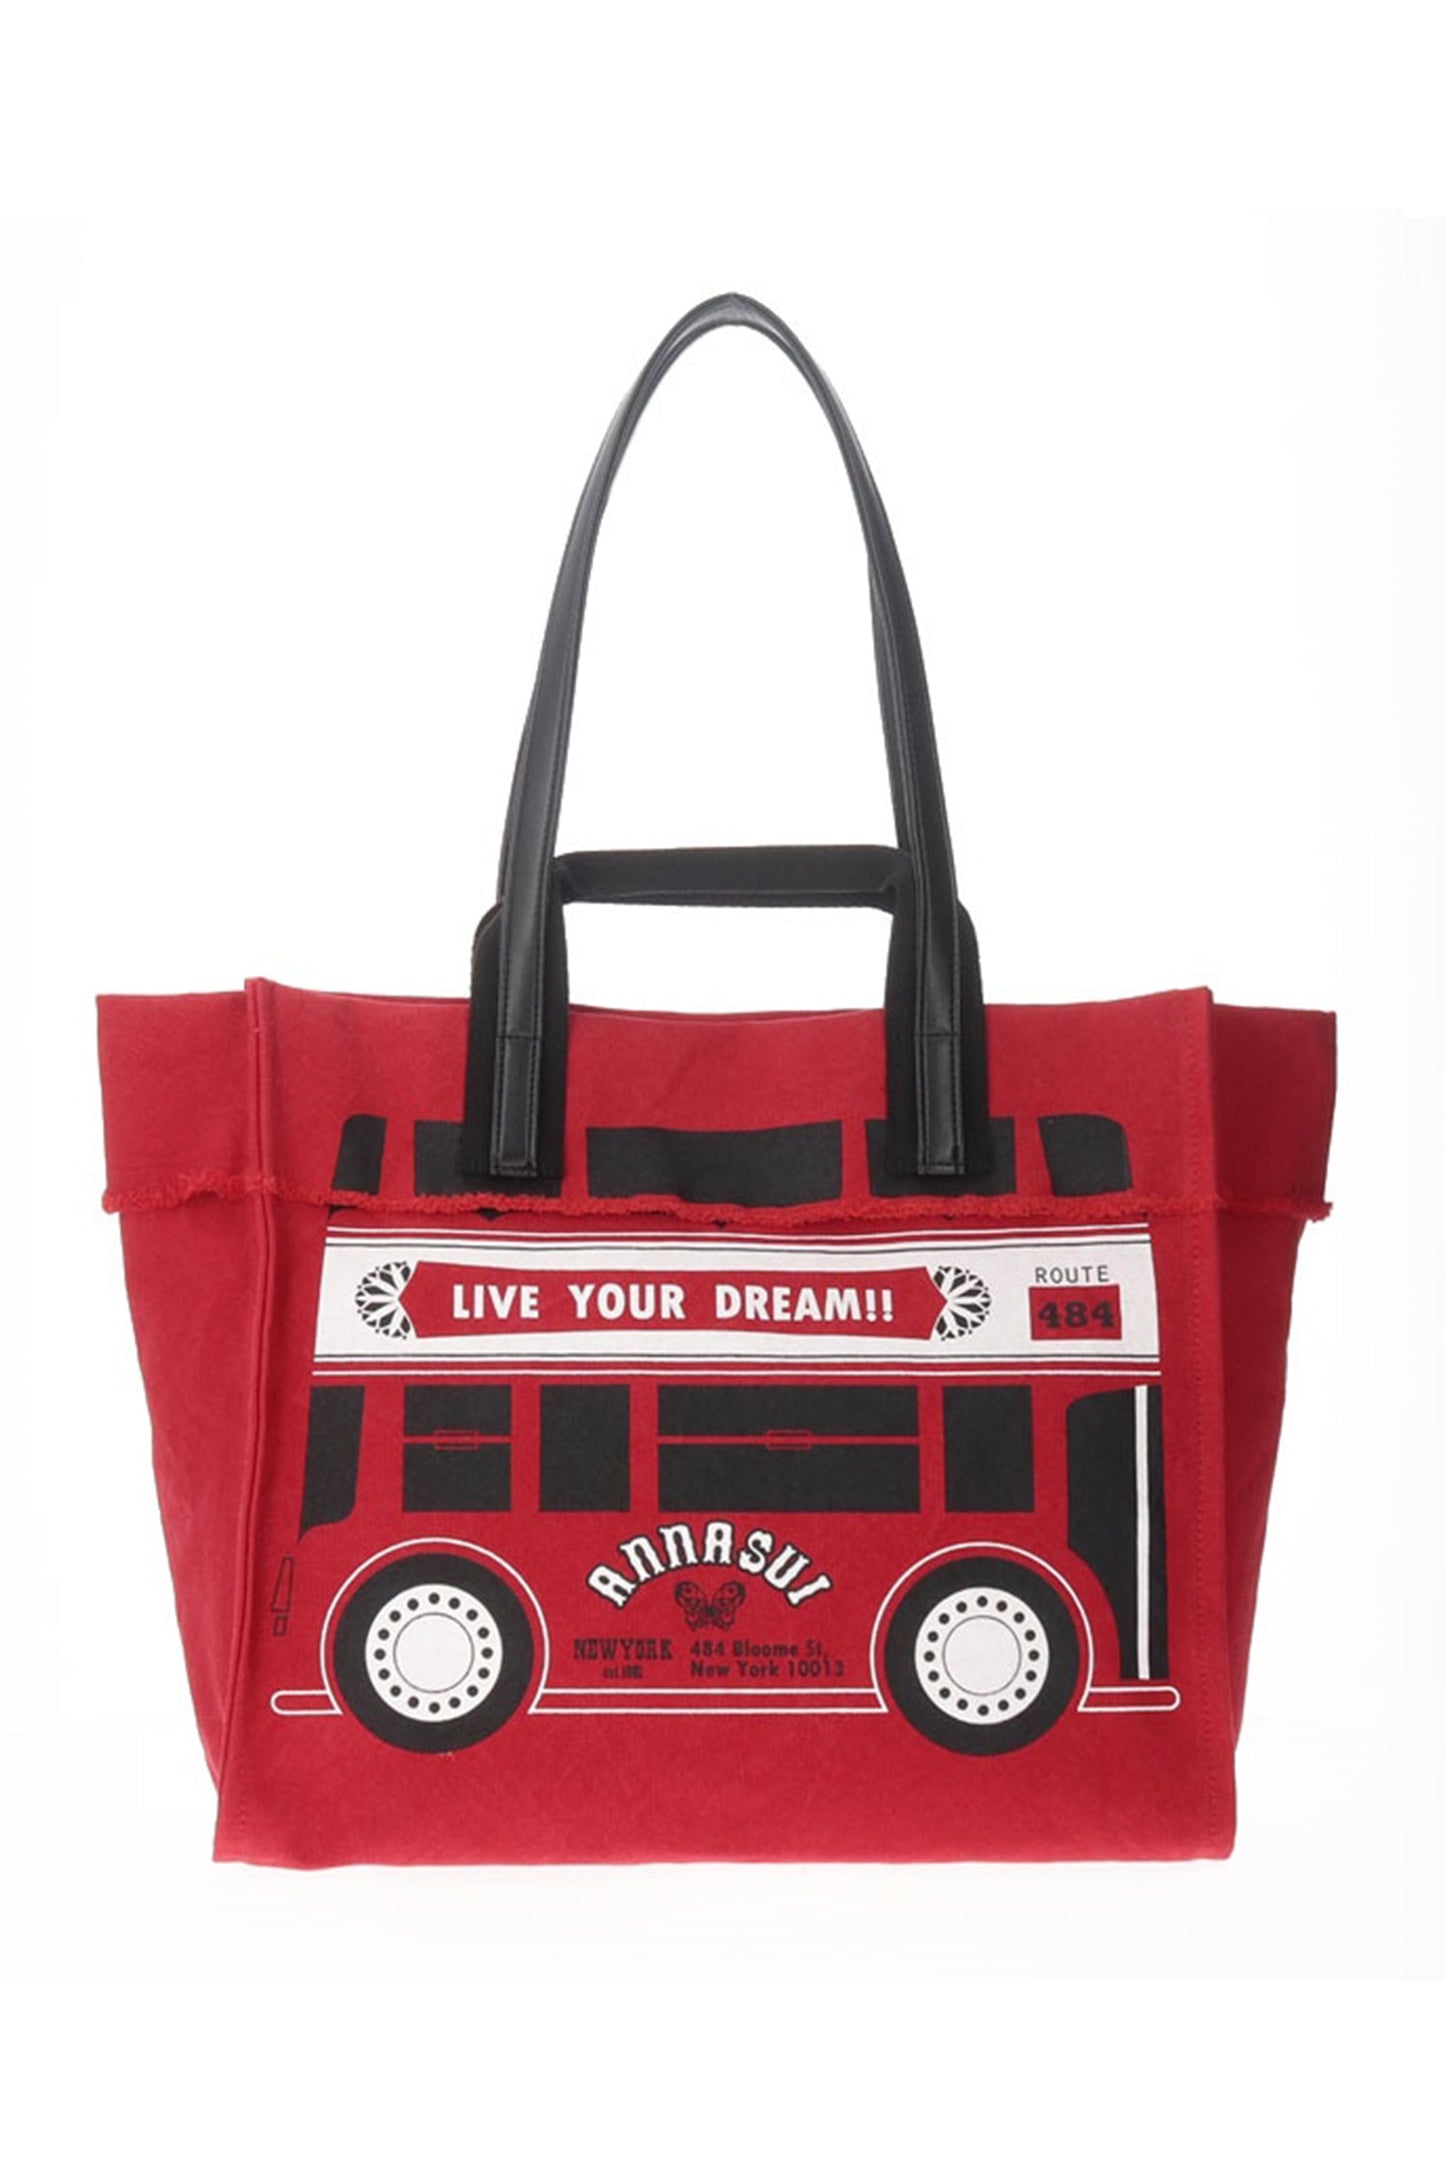 Anna Sui Tote Bag, stylized bus with “live your dream”, Anna Sui, 2 sets of handles long & short